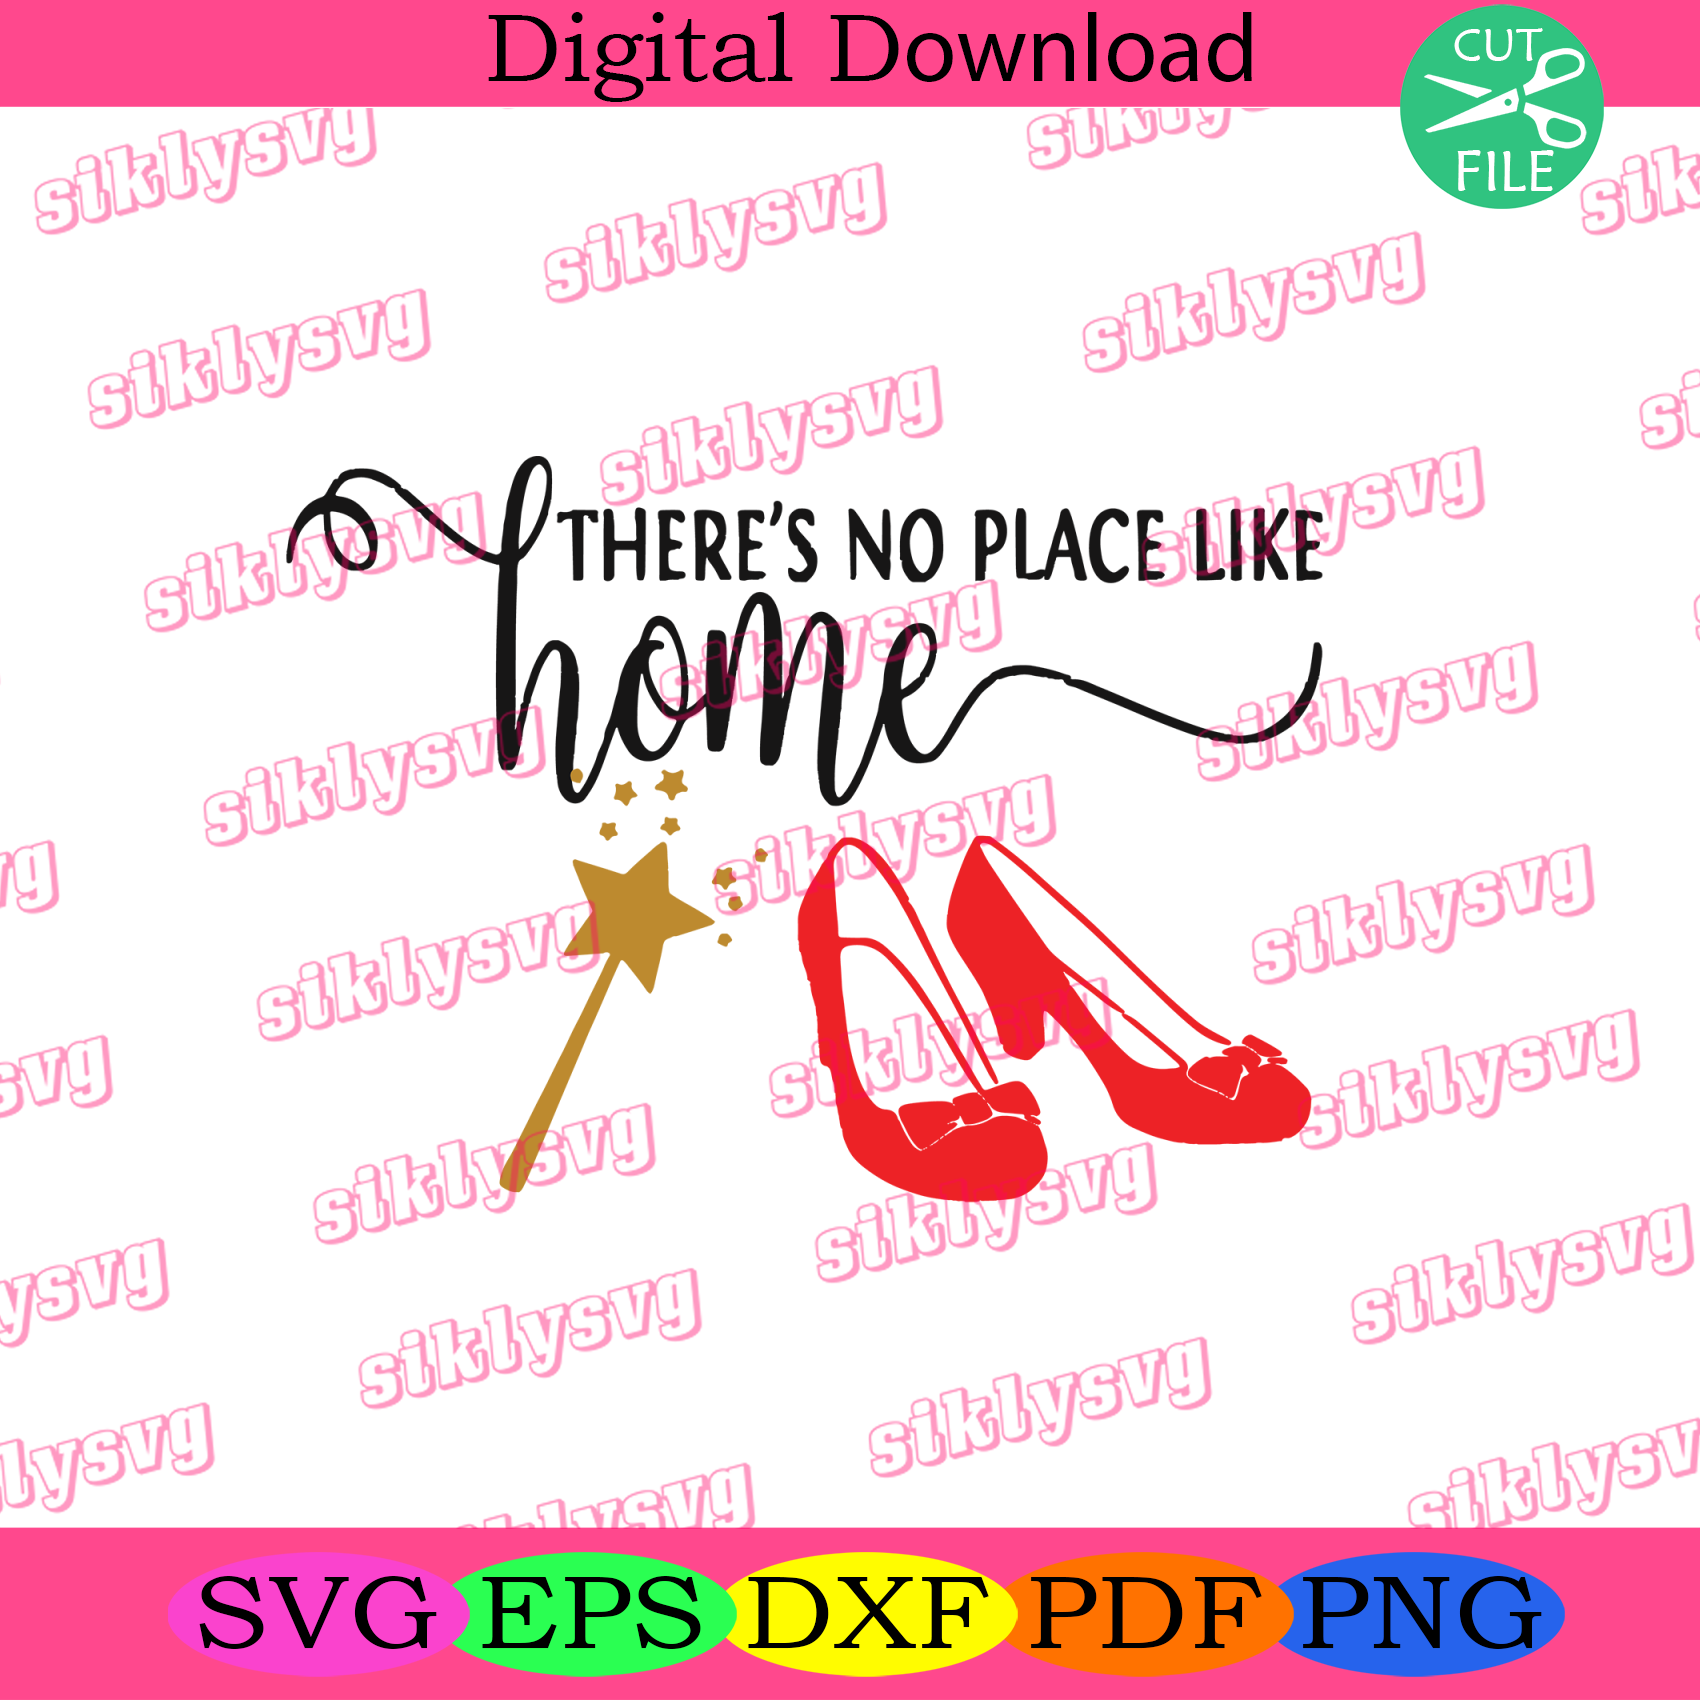 Theres No Place Like Home Trending Svg, Quotes Svg, Home Svg - SilkySVG